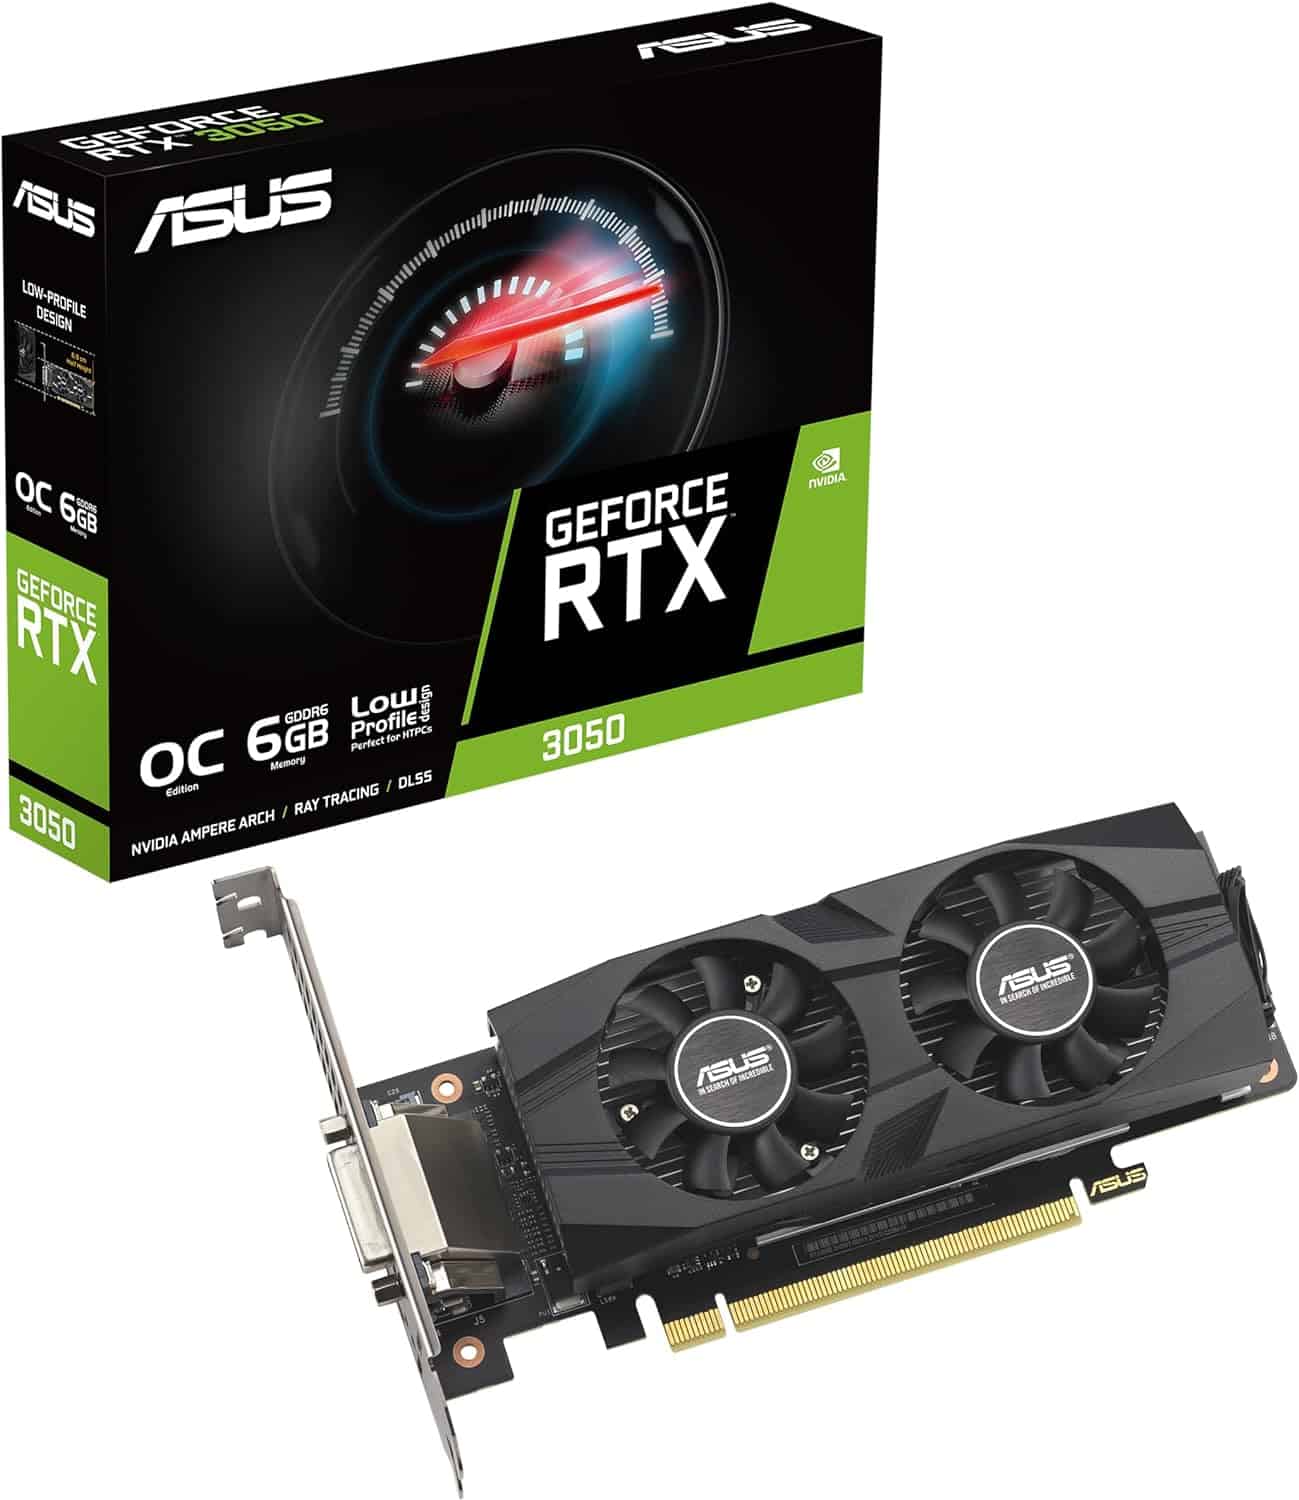 Asus Nvidia RTX 3050 graphics card and its packaging box displaying key features and design.